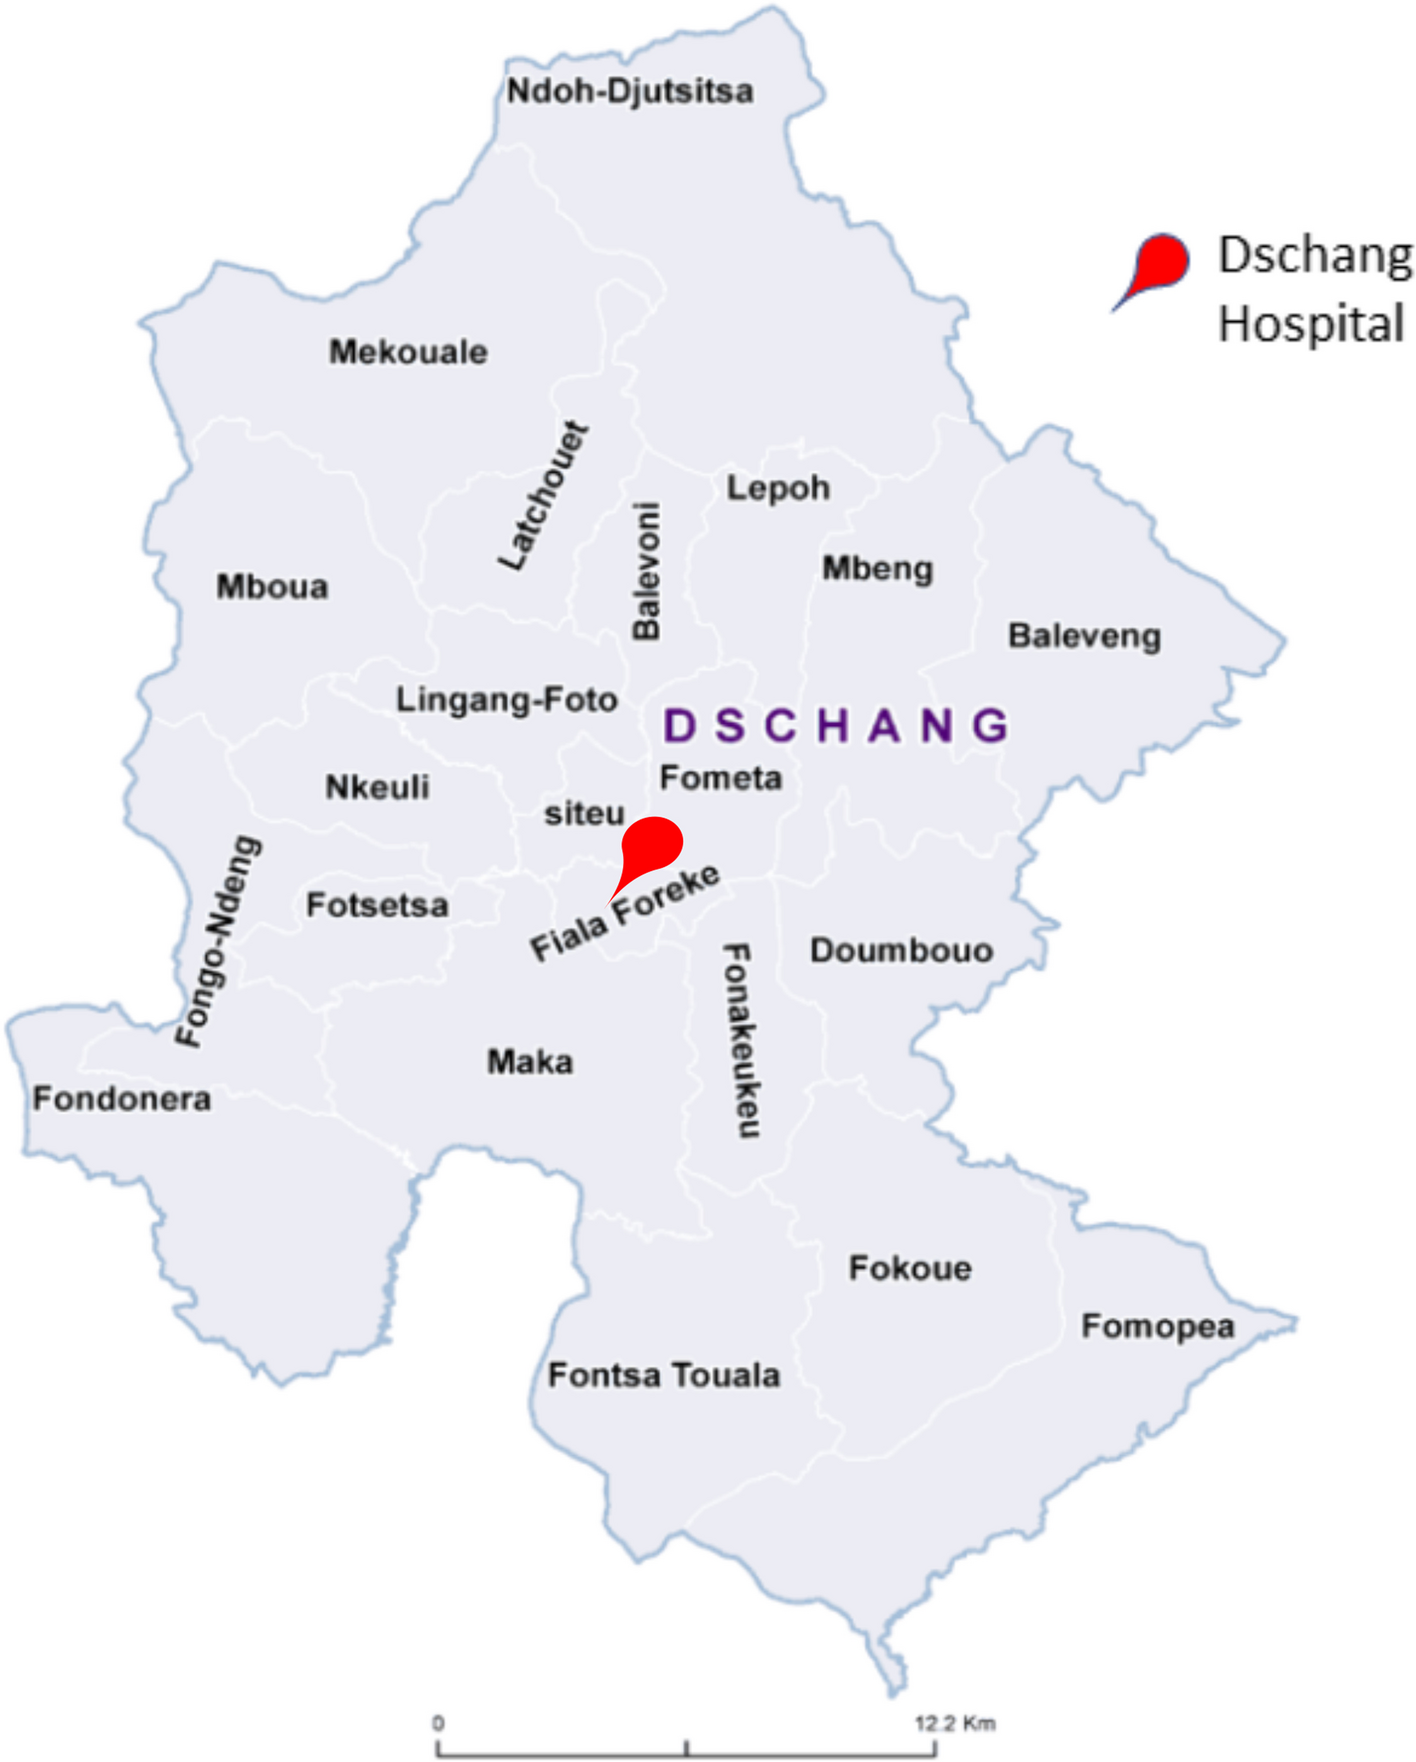 Acceptability of artificial intelligence for cervical cancer screening in Dschang, Cameroon: a qualitative study on patient perspectives